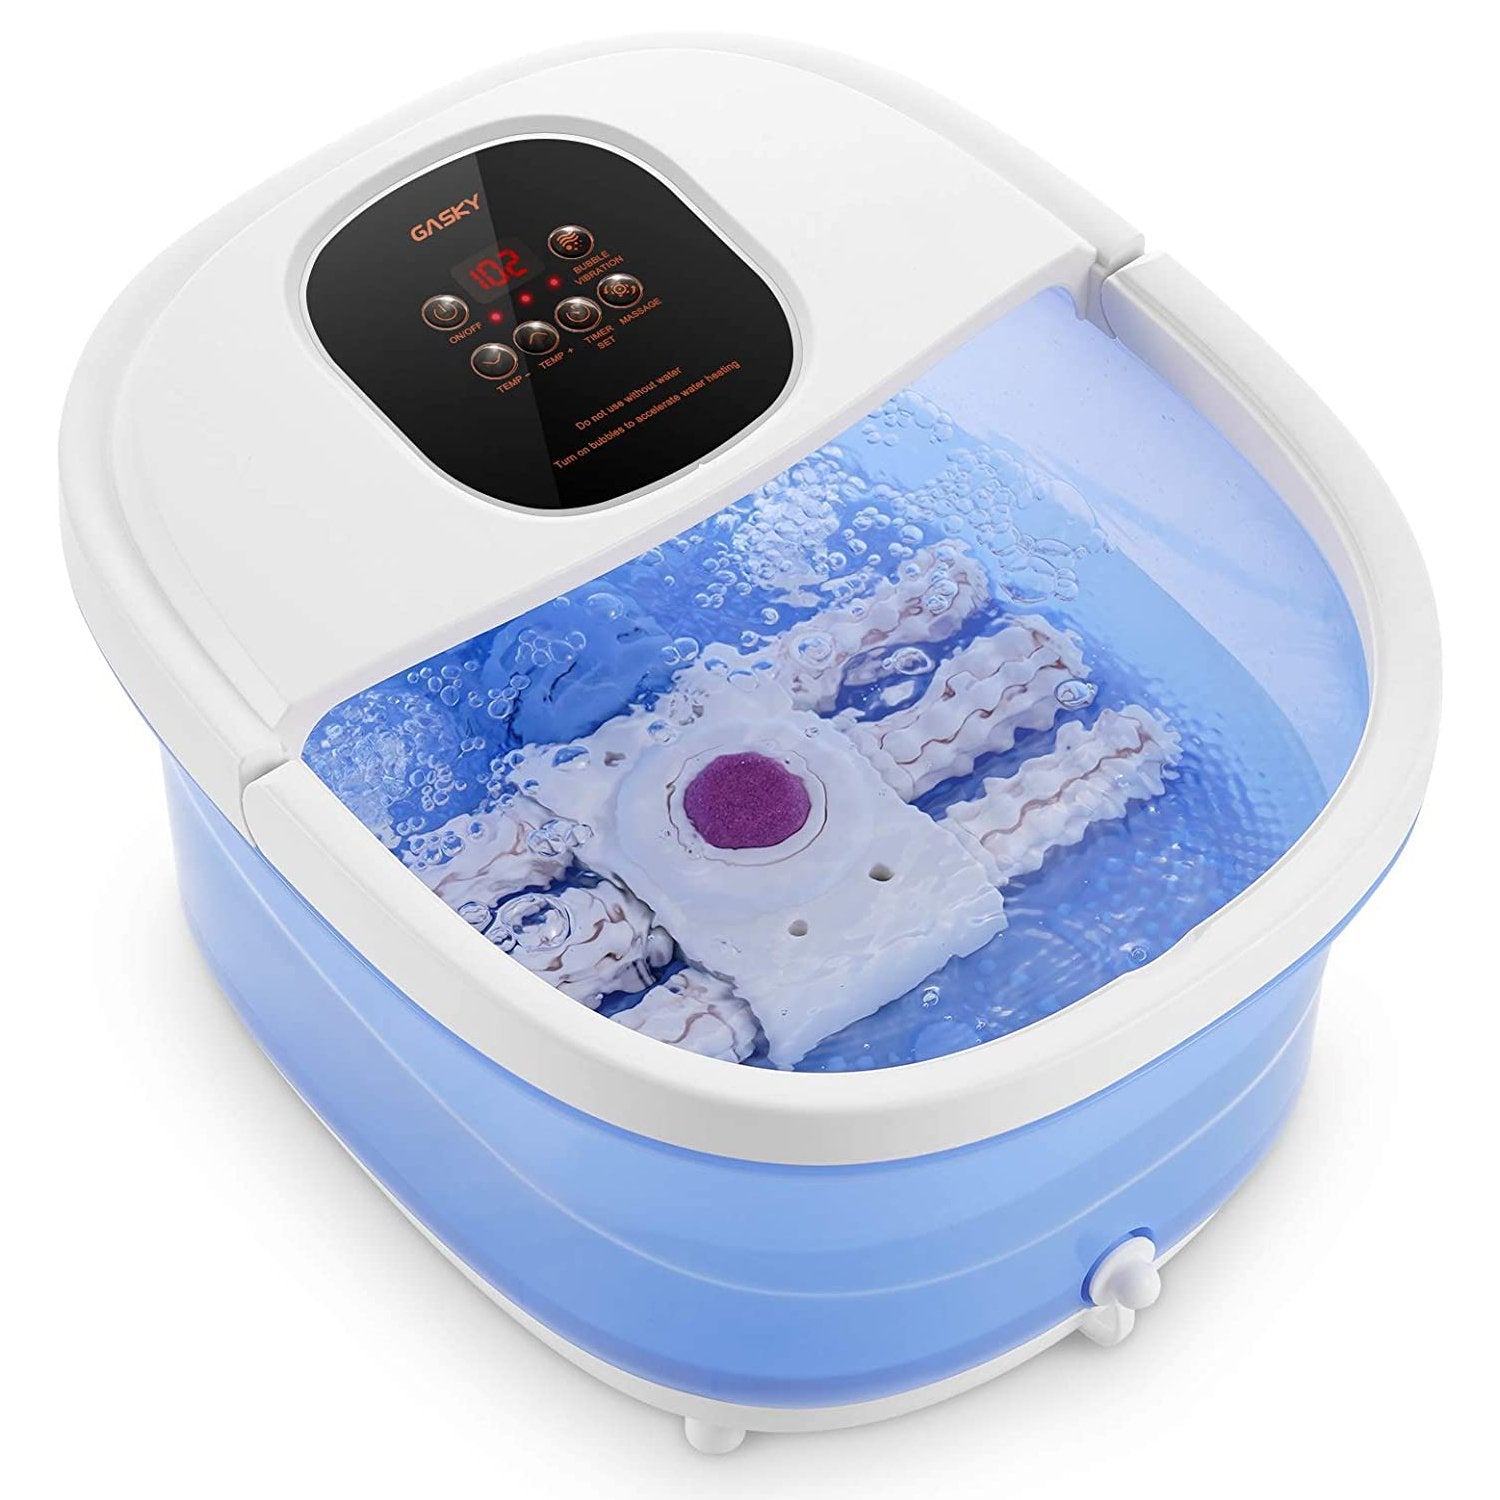 http://www.maxkare.net/cdn/shop/products/foot-spabath-massager-6-in-1-heat-bubbles-vibration-6-motorized-shiatsu-rollers-frequency-conversion-time-temprature-settings-pedicure-tub-bath-for-feet-home-us-801592.jpg?v=1626676578